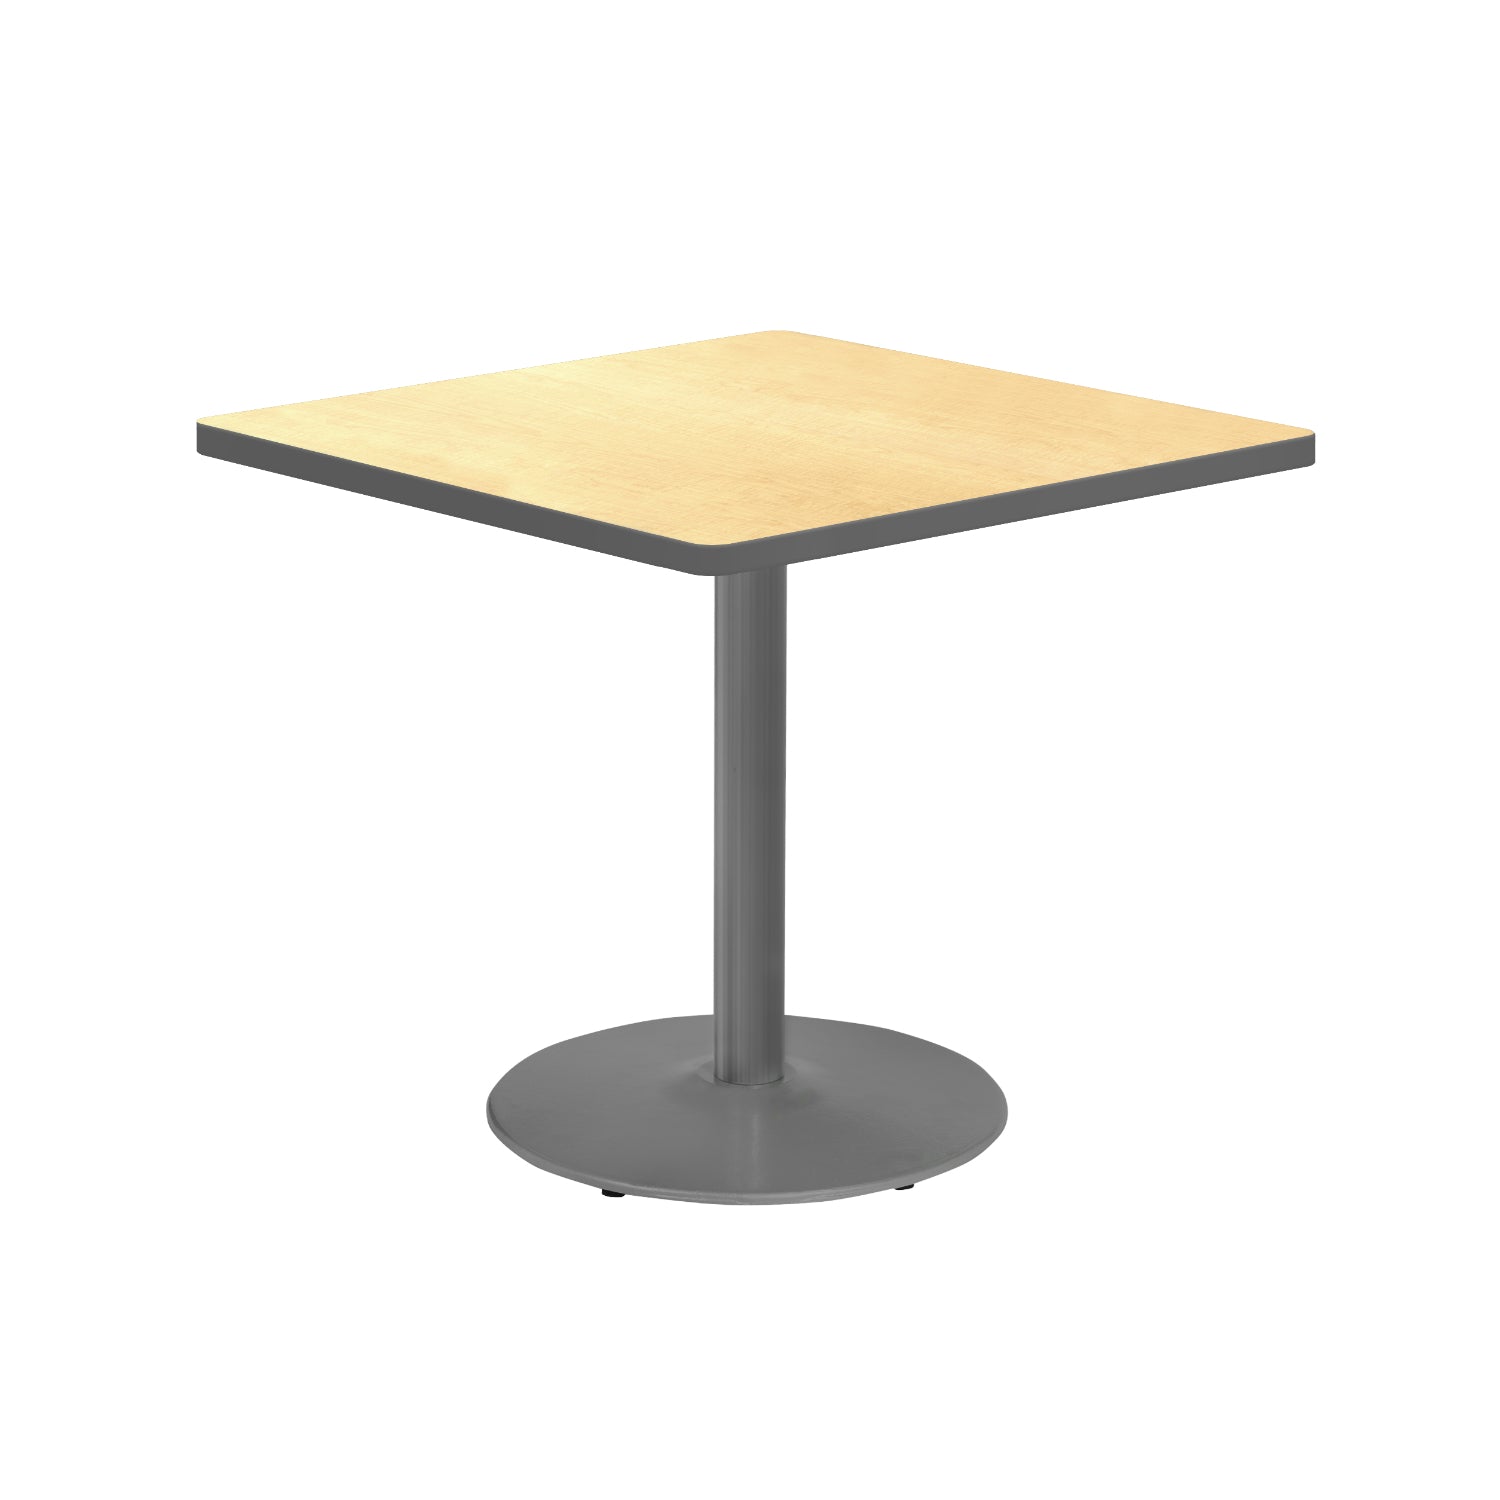 36" Square Sitting Height Café Table